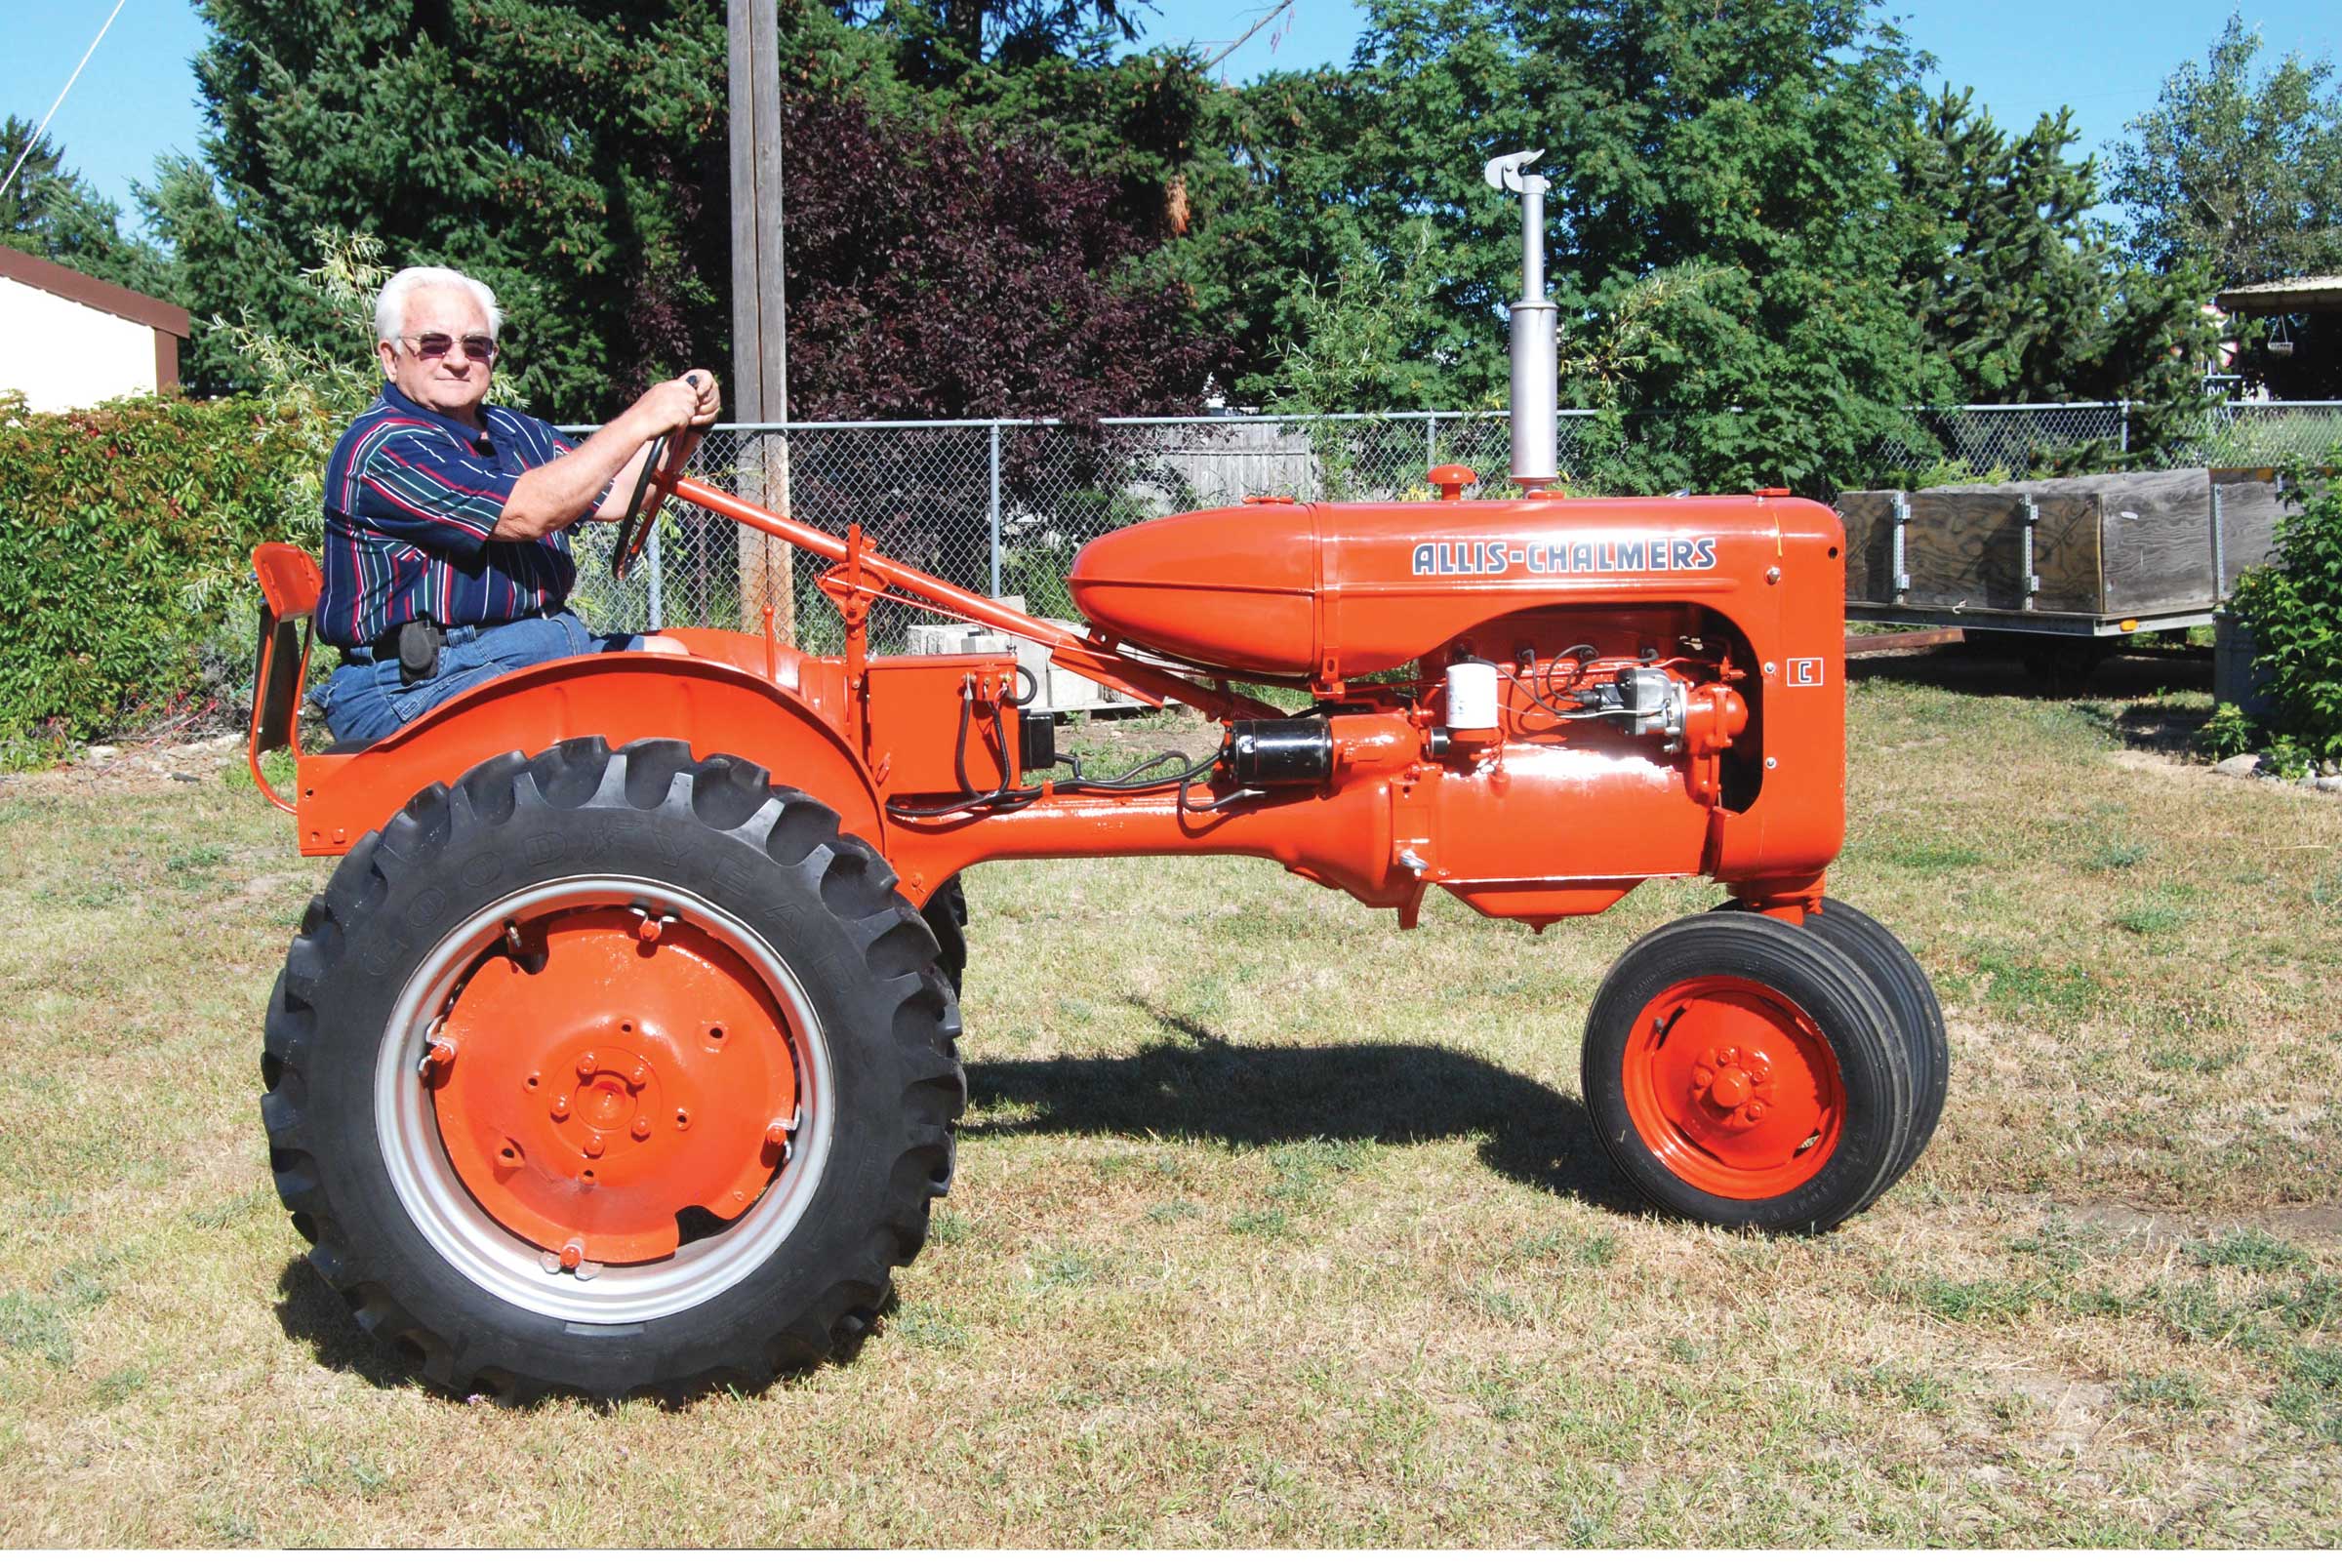 ... Project: An Allis-Chalmers C - Restoration - Farm Collector